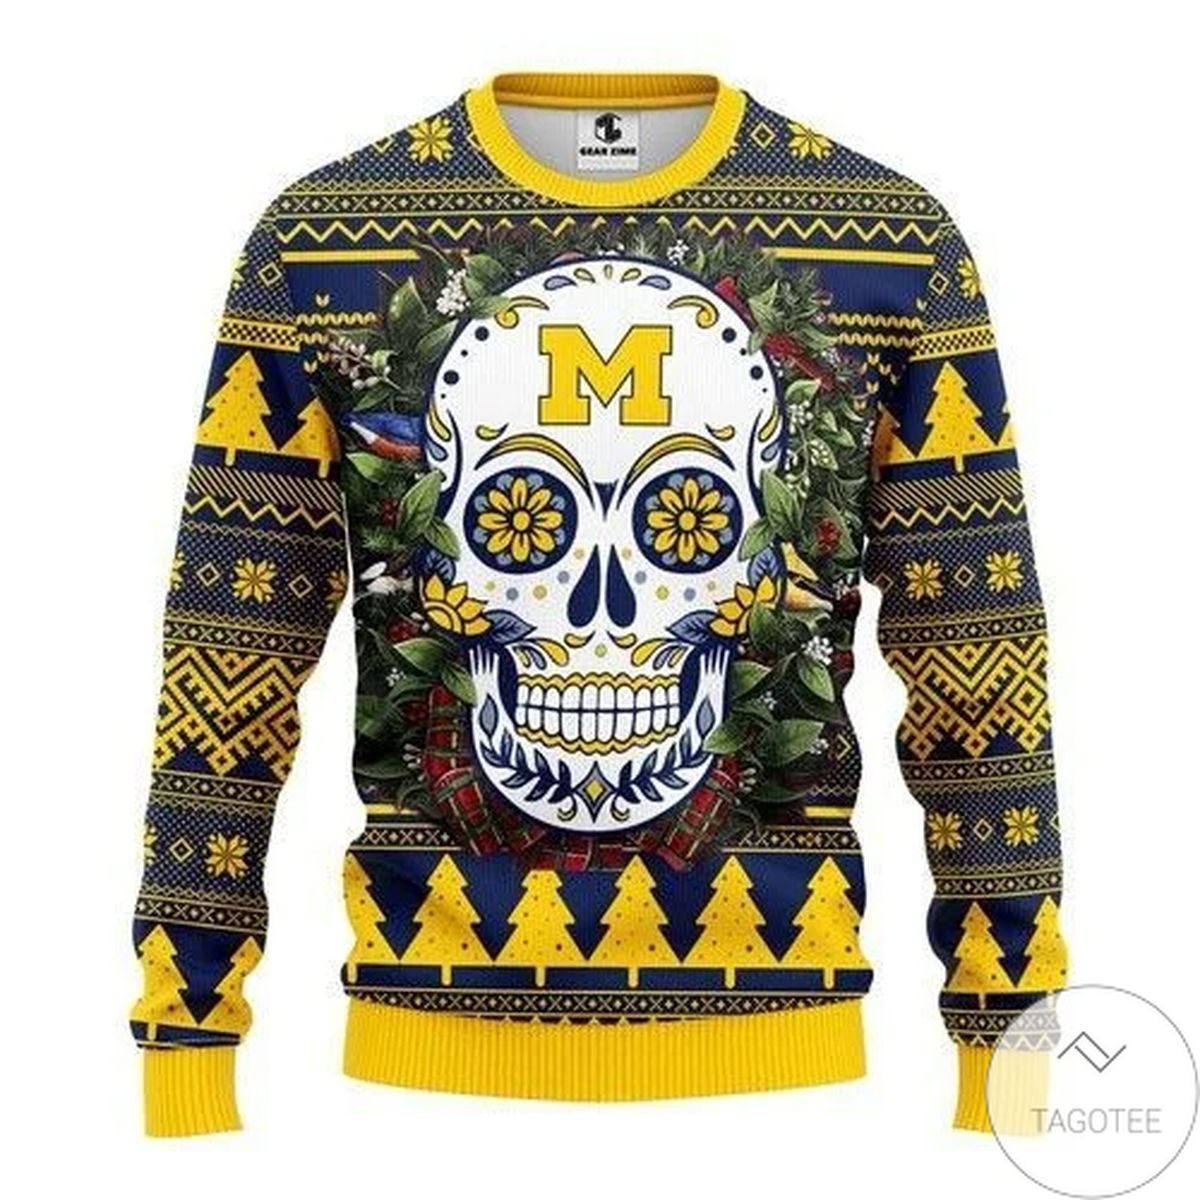 Ncaa Michigan Wolverines Skull Flower Ugly Christmas Sweater